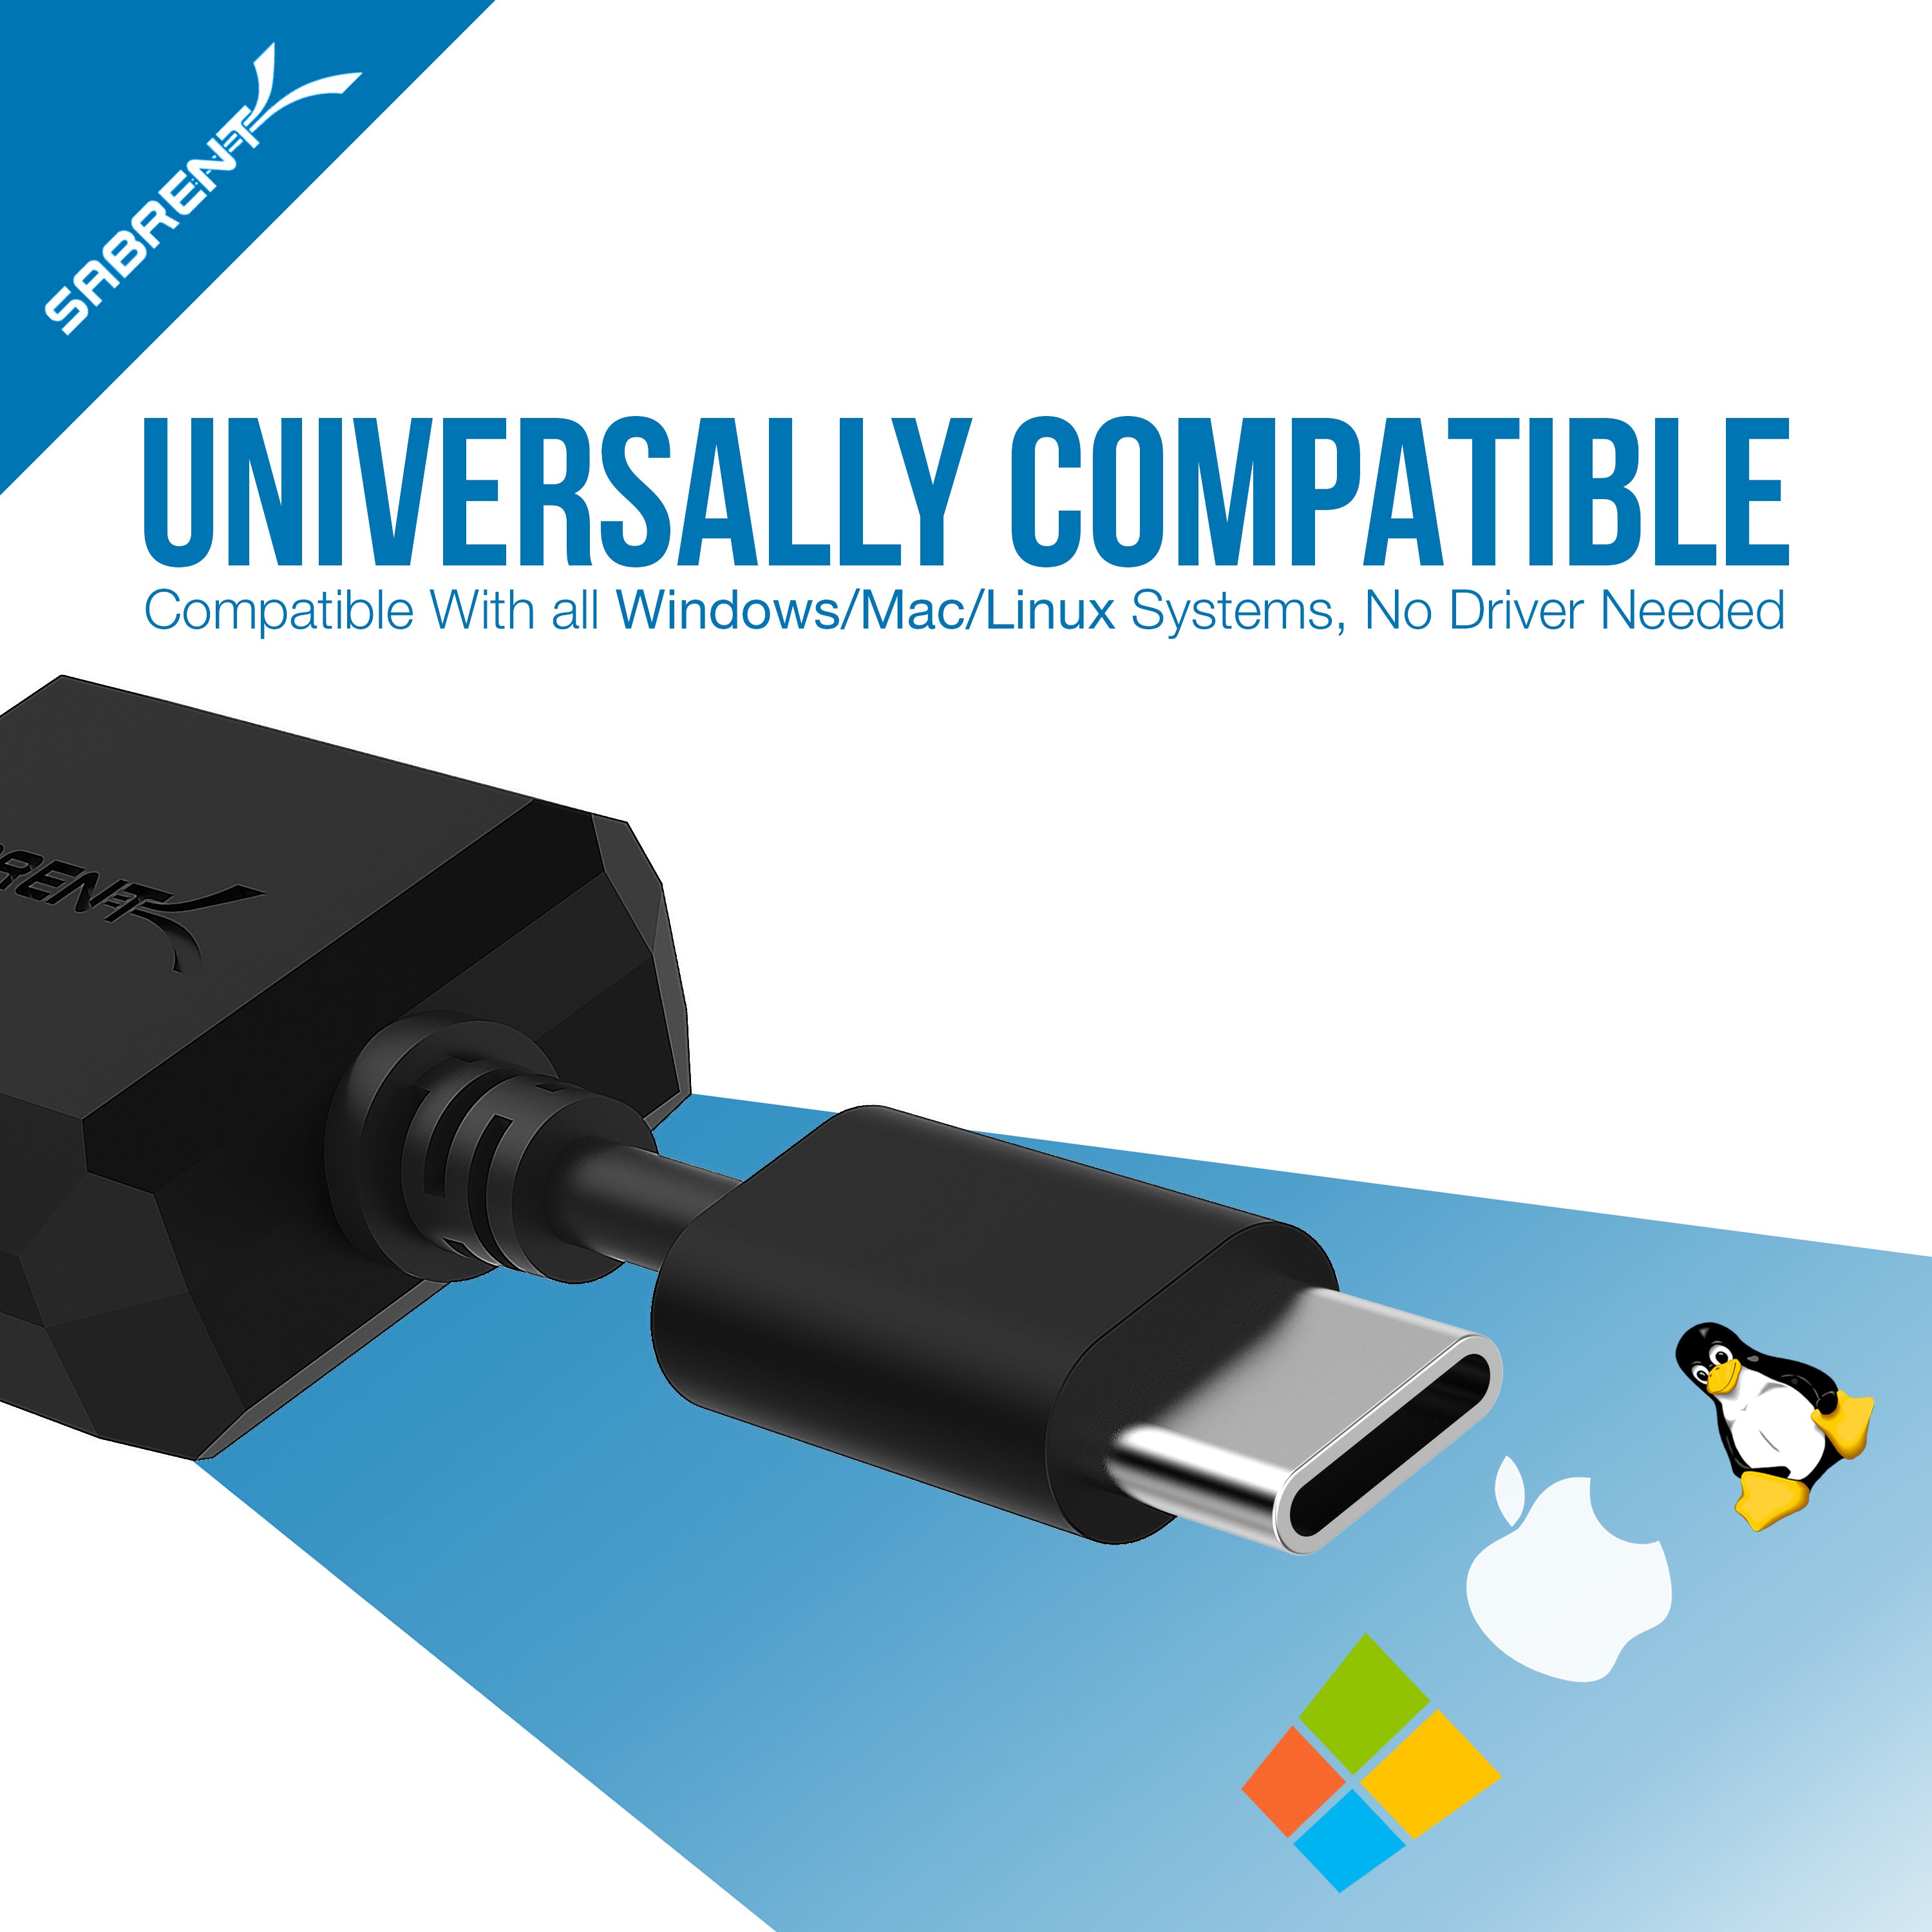 USB To 3.5mm Audio Jack Adapter, USB Type C External Stereo Sound Adapter  for Windows and Mac. Plug and Play No Drivers Needed. 